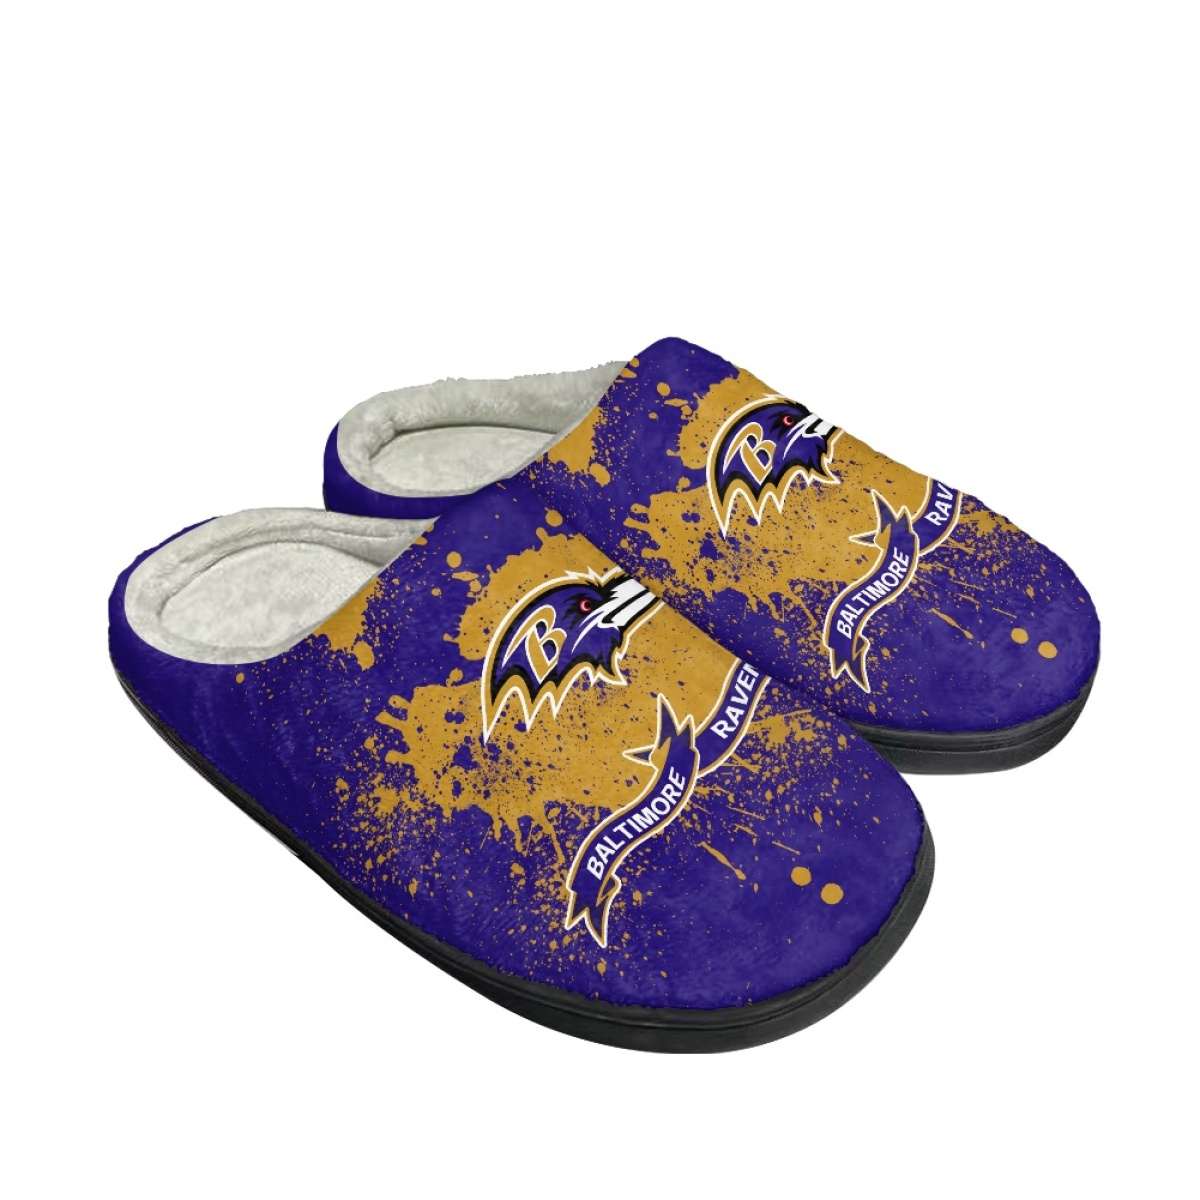 Women's Baltimore Ravens Slippers/Shoes 006